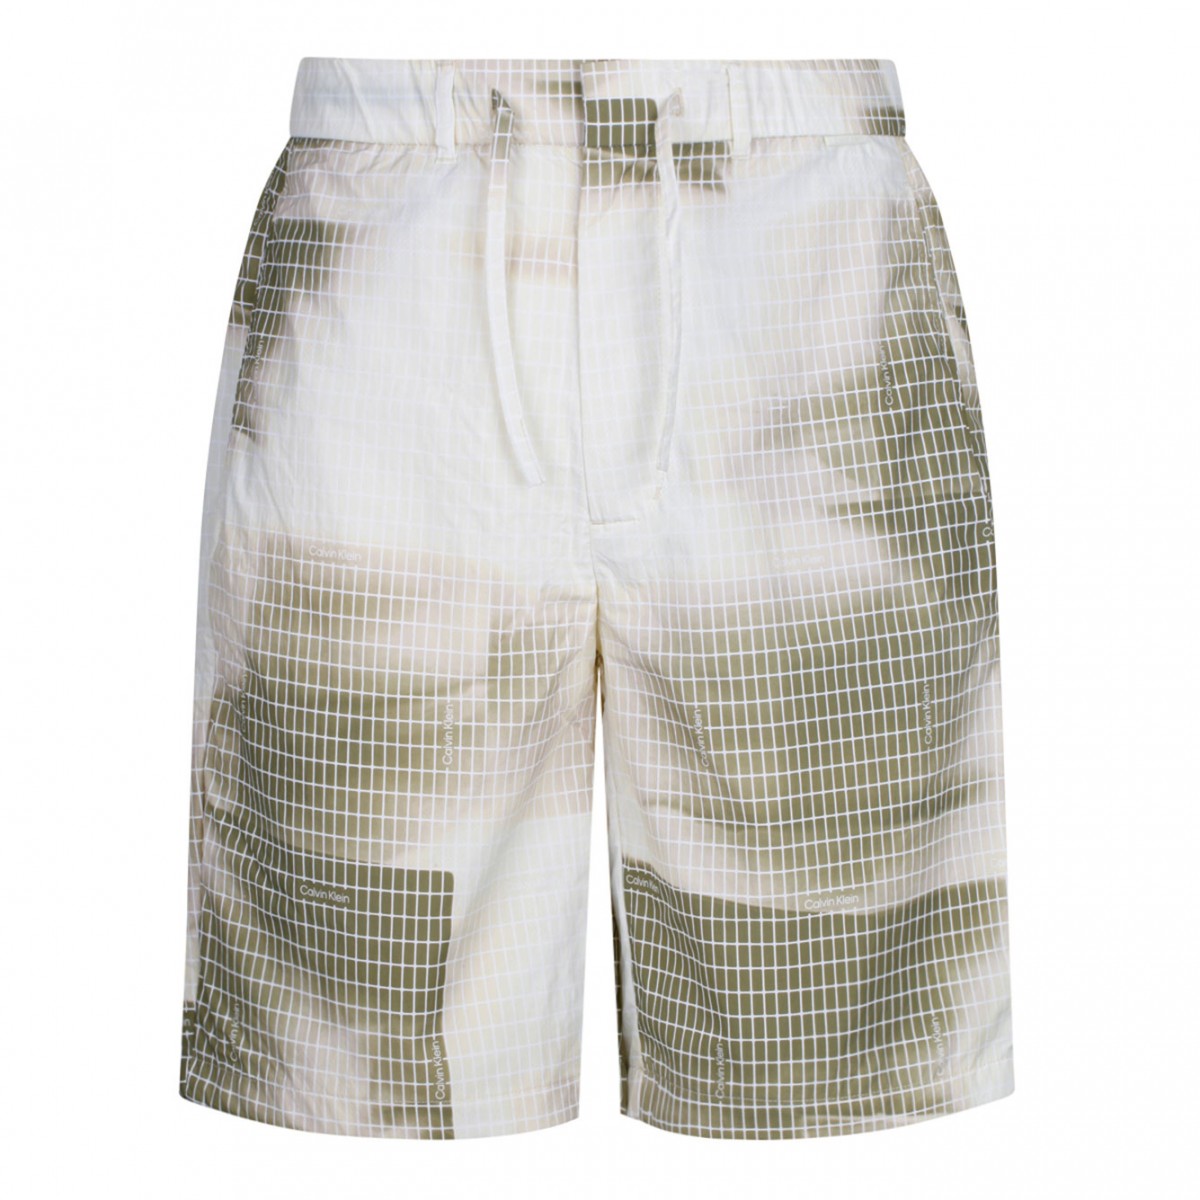 Lightweight Diffused Grid Shorts